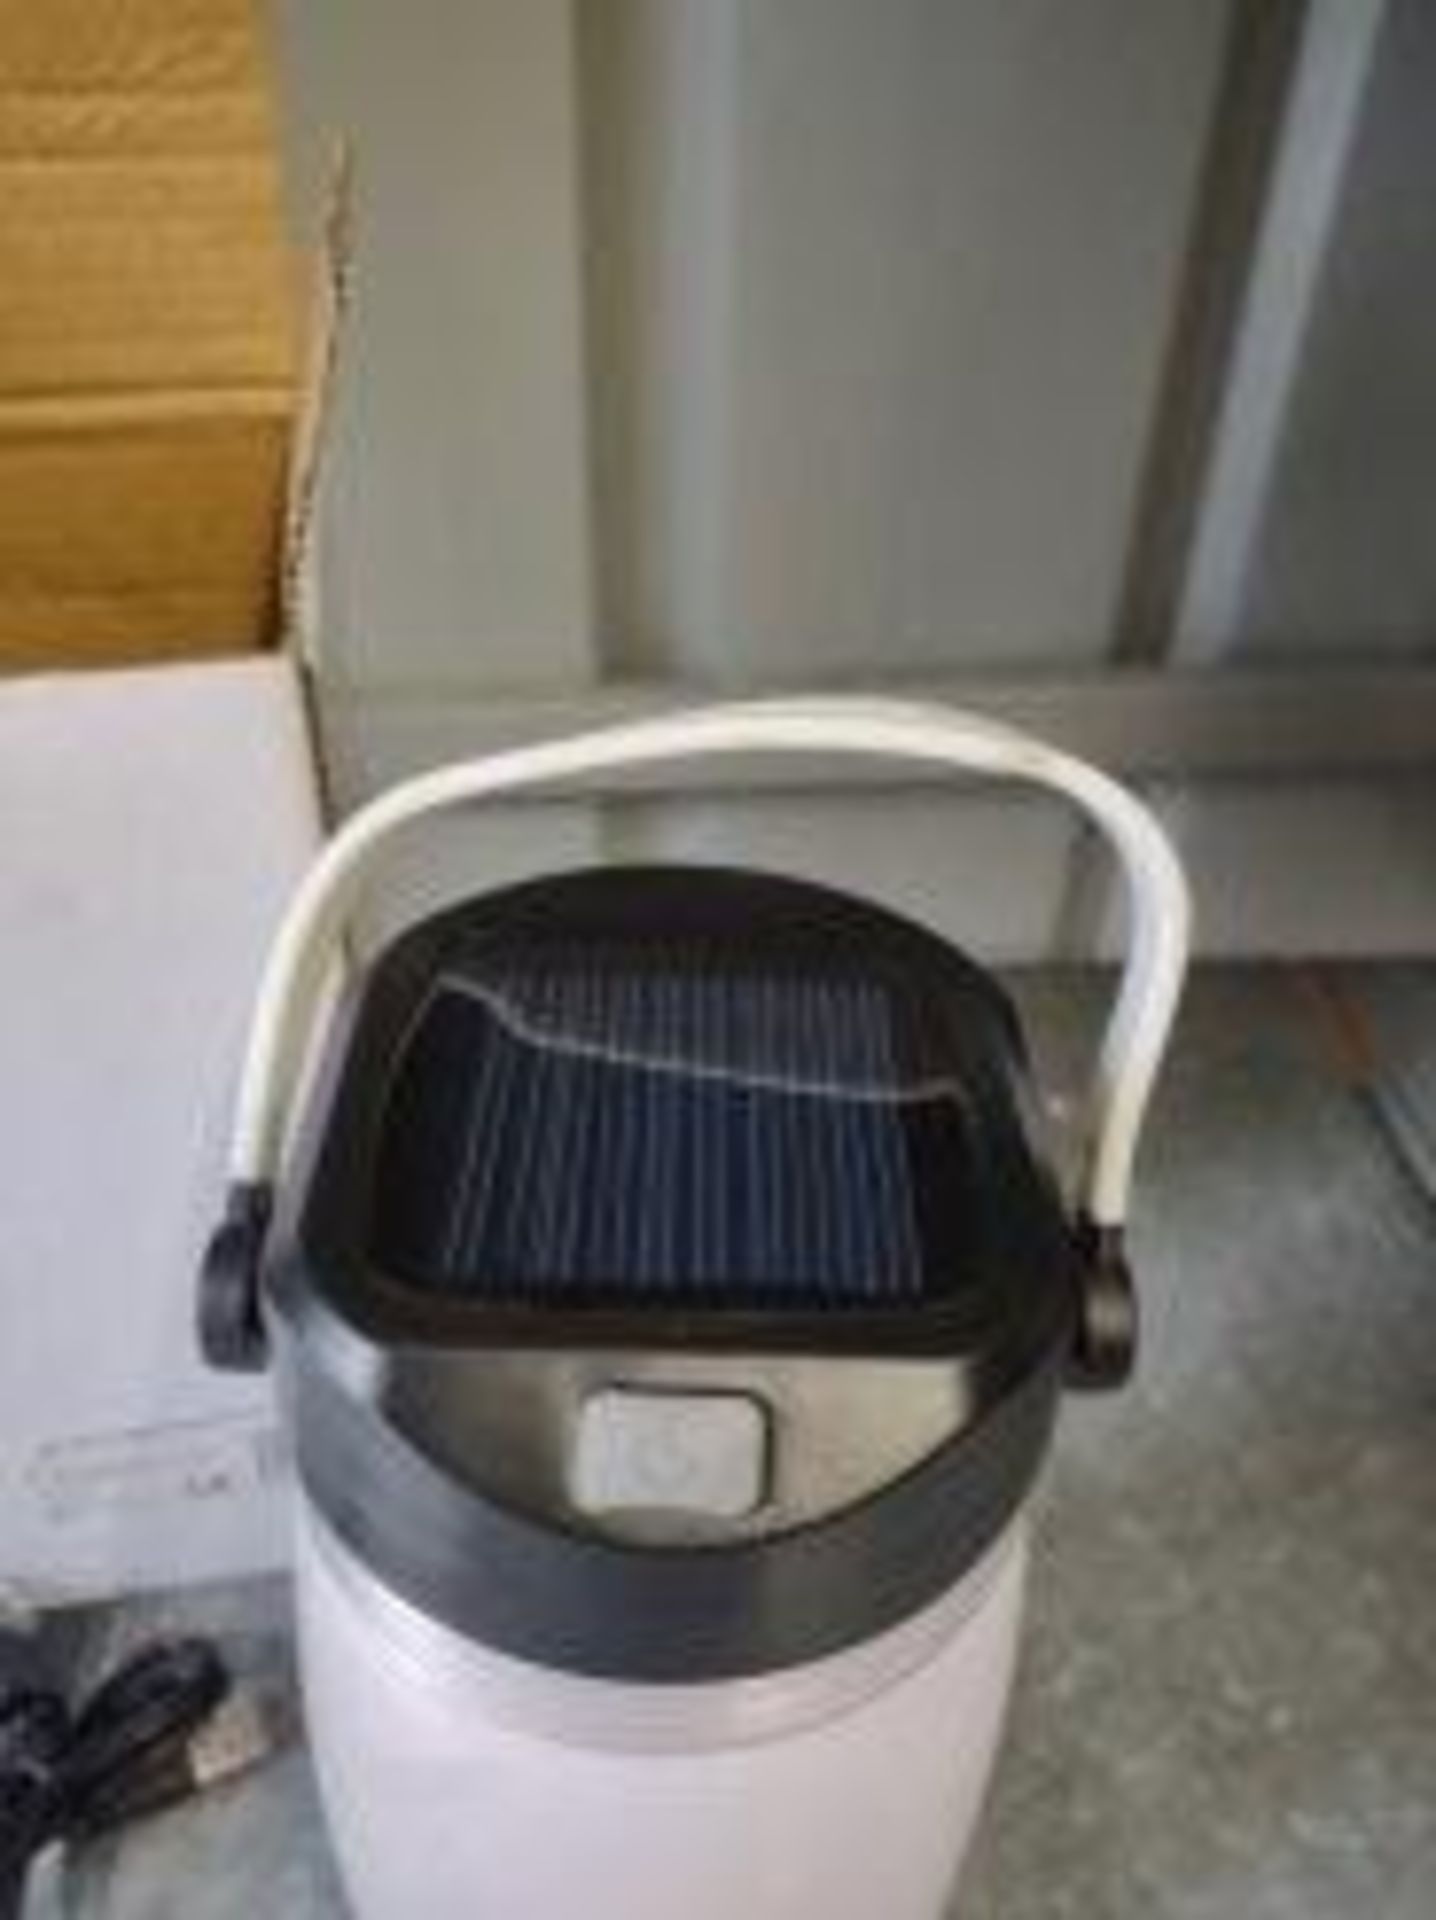 Aura Glow lights, solar & power bank x10 – Approx rrp £7.99 x 10 £79.99 - Image 2 of 2